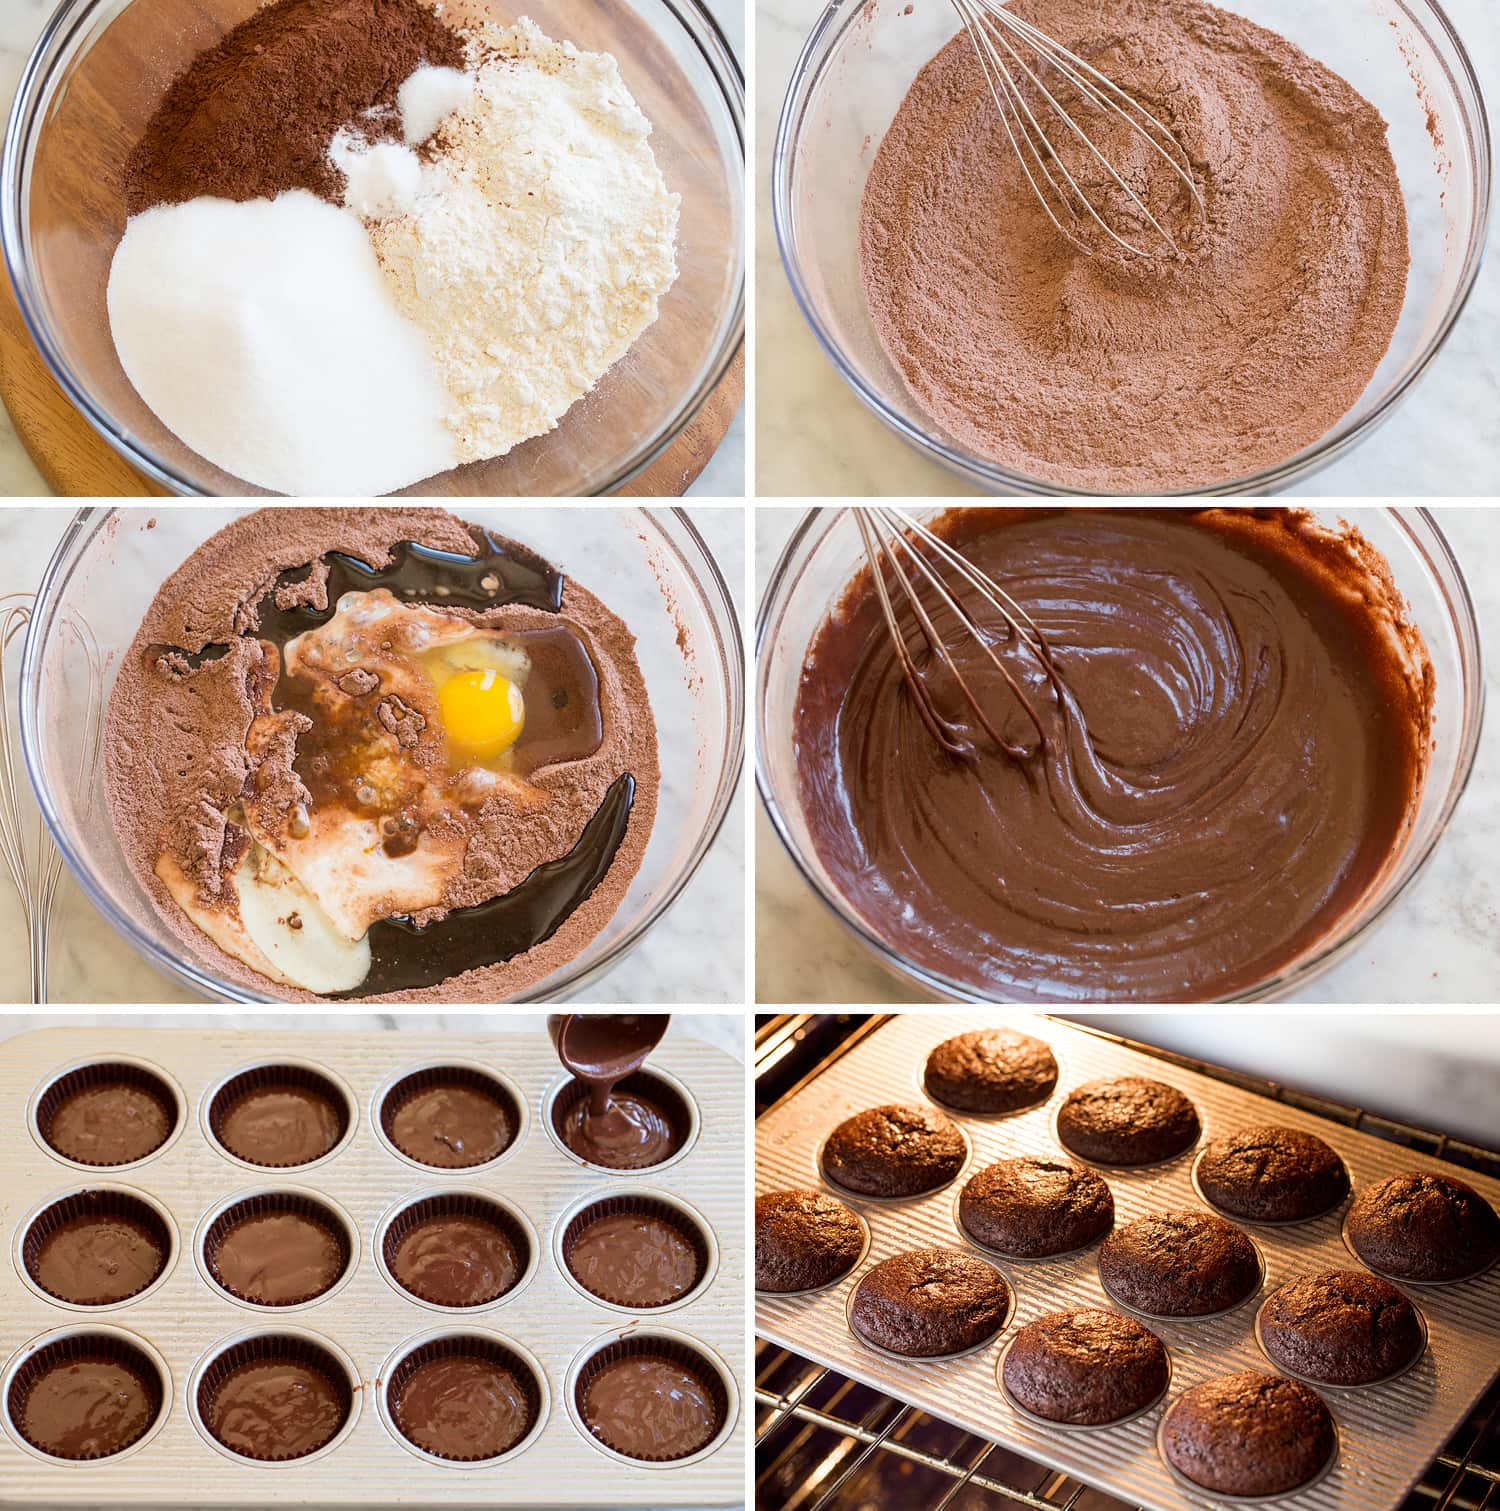 Steps of making easy chocolate cupcake batter and baking.